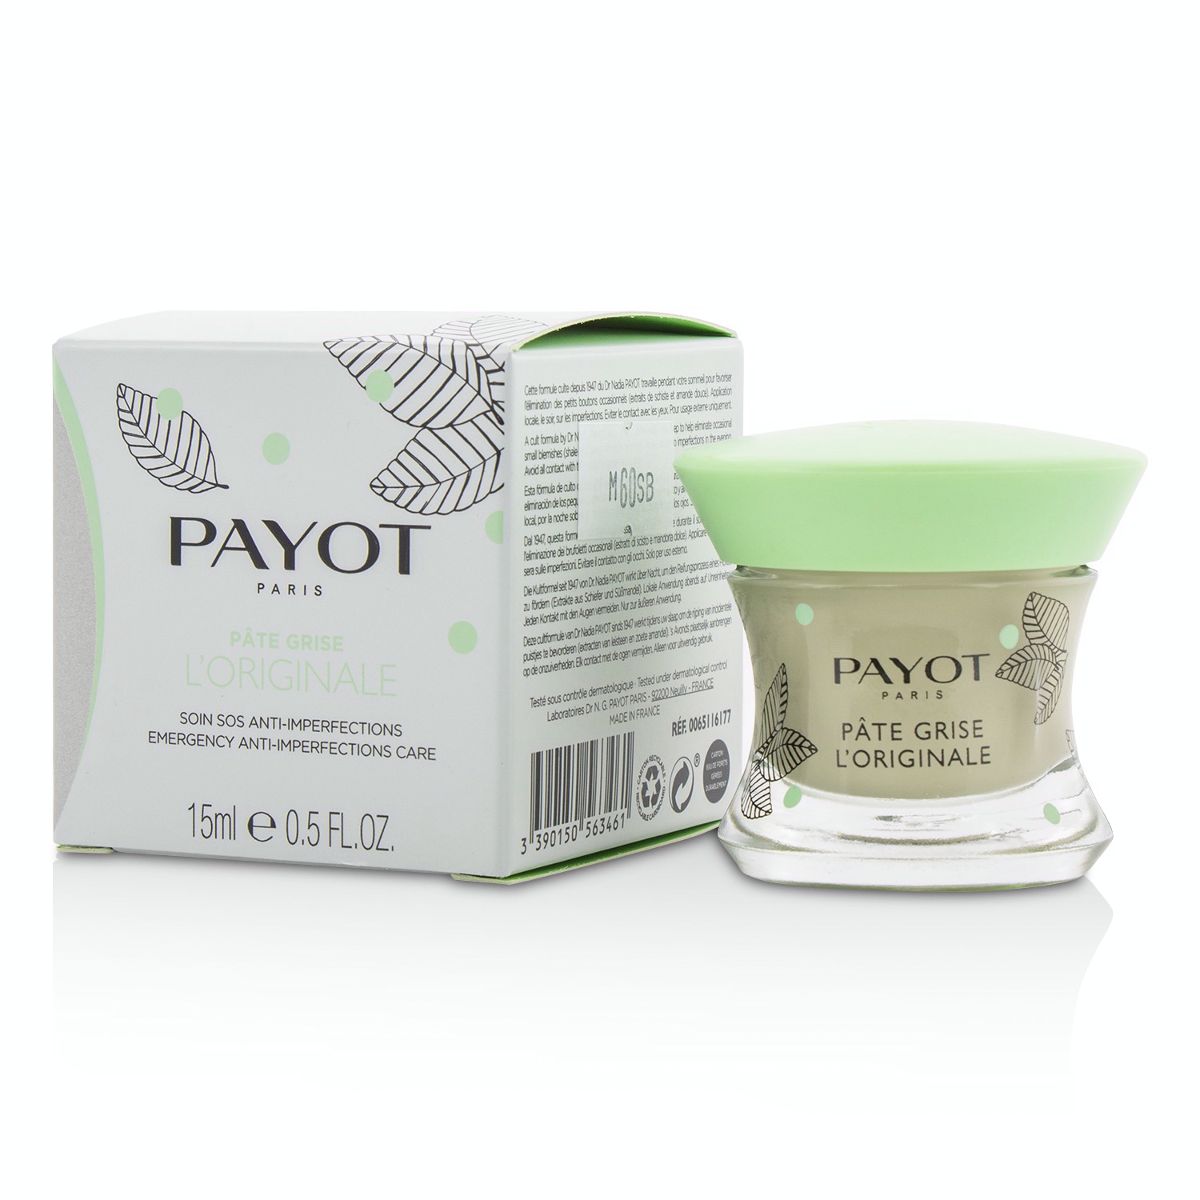 Pate Grise LOriginale - Emergency Anti-Imperfections Care Payot Image